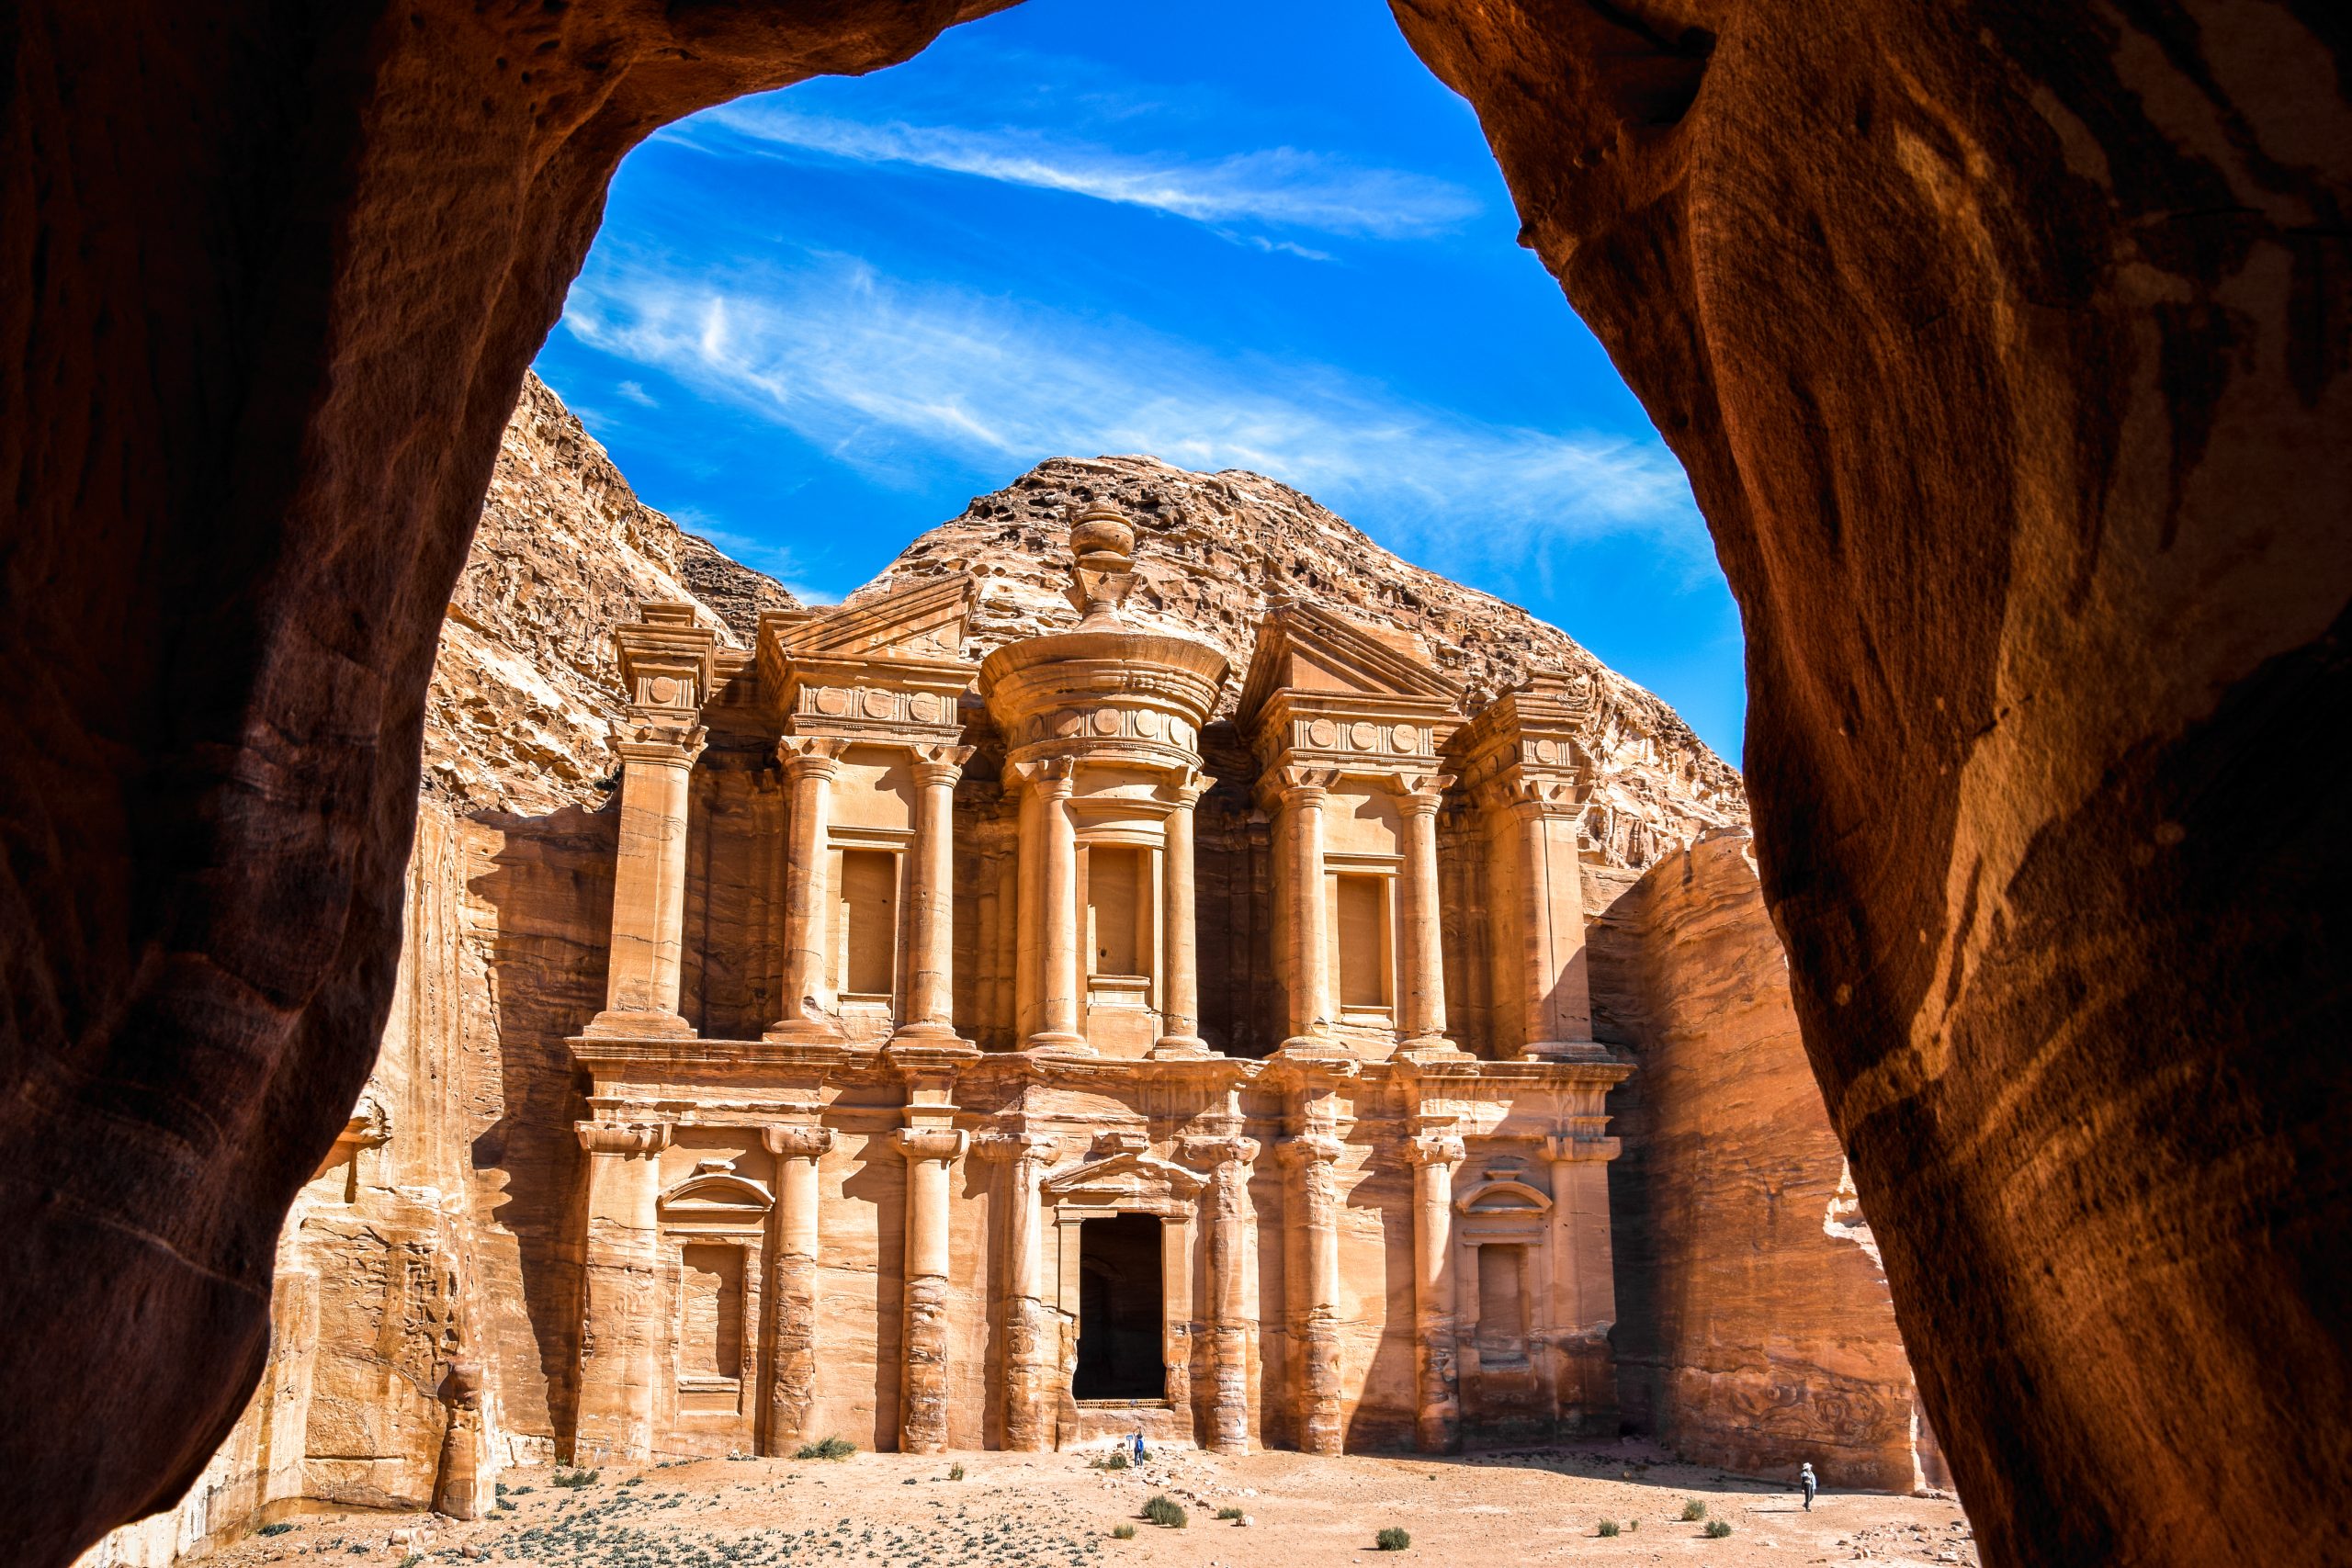 Petra Wadi Rum 3 Day Tour From Eilat - The Monastery